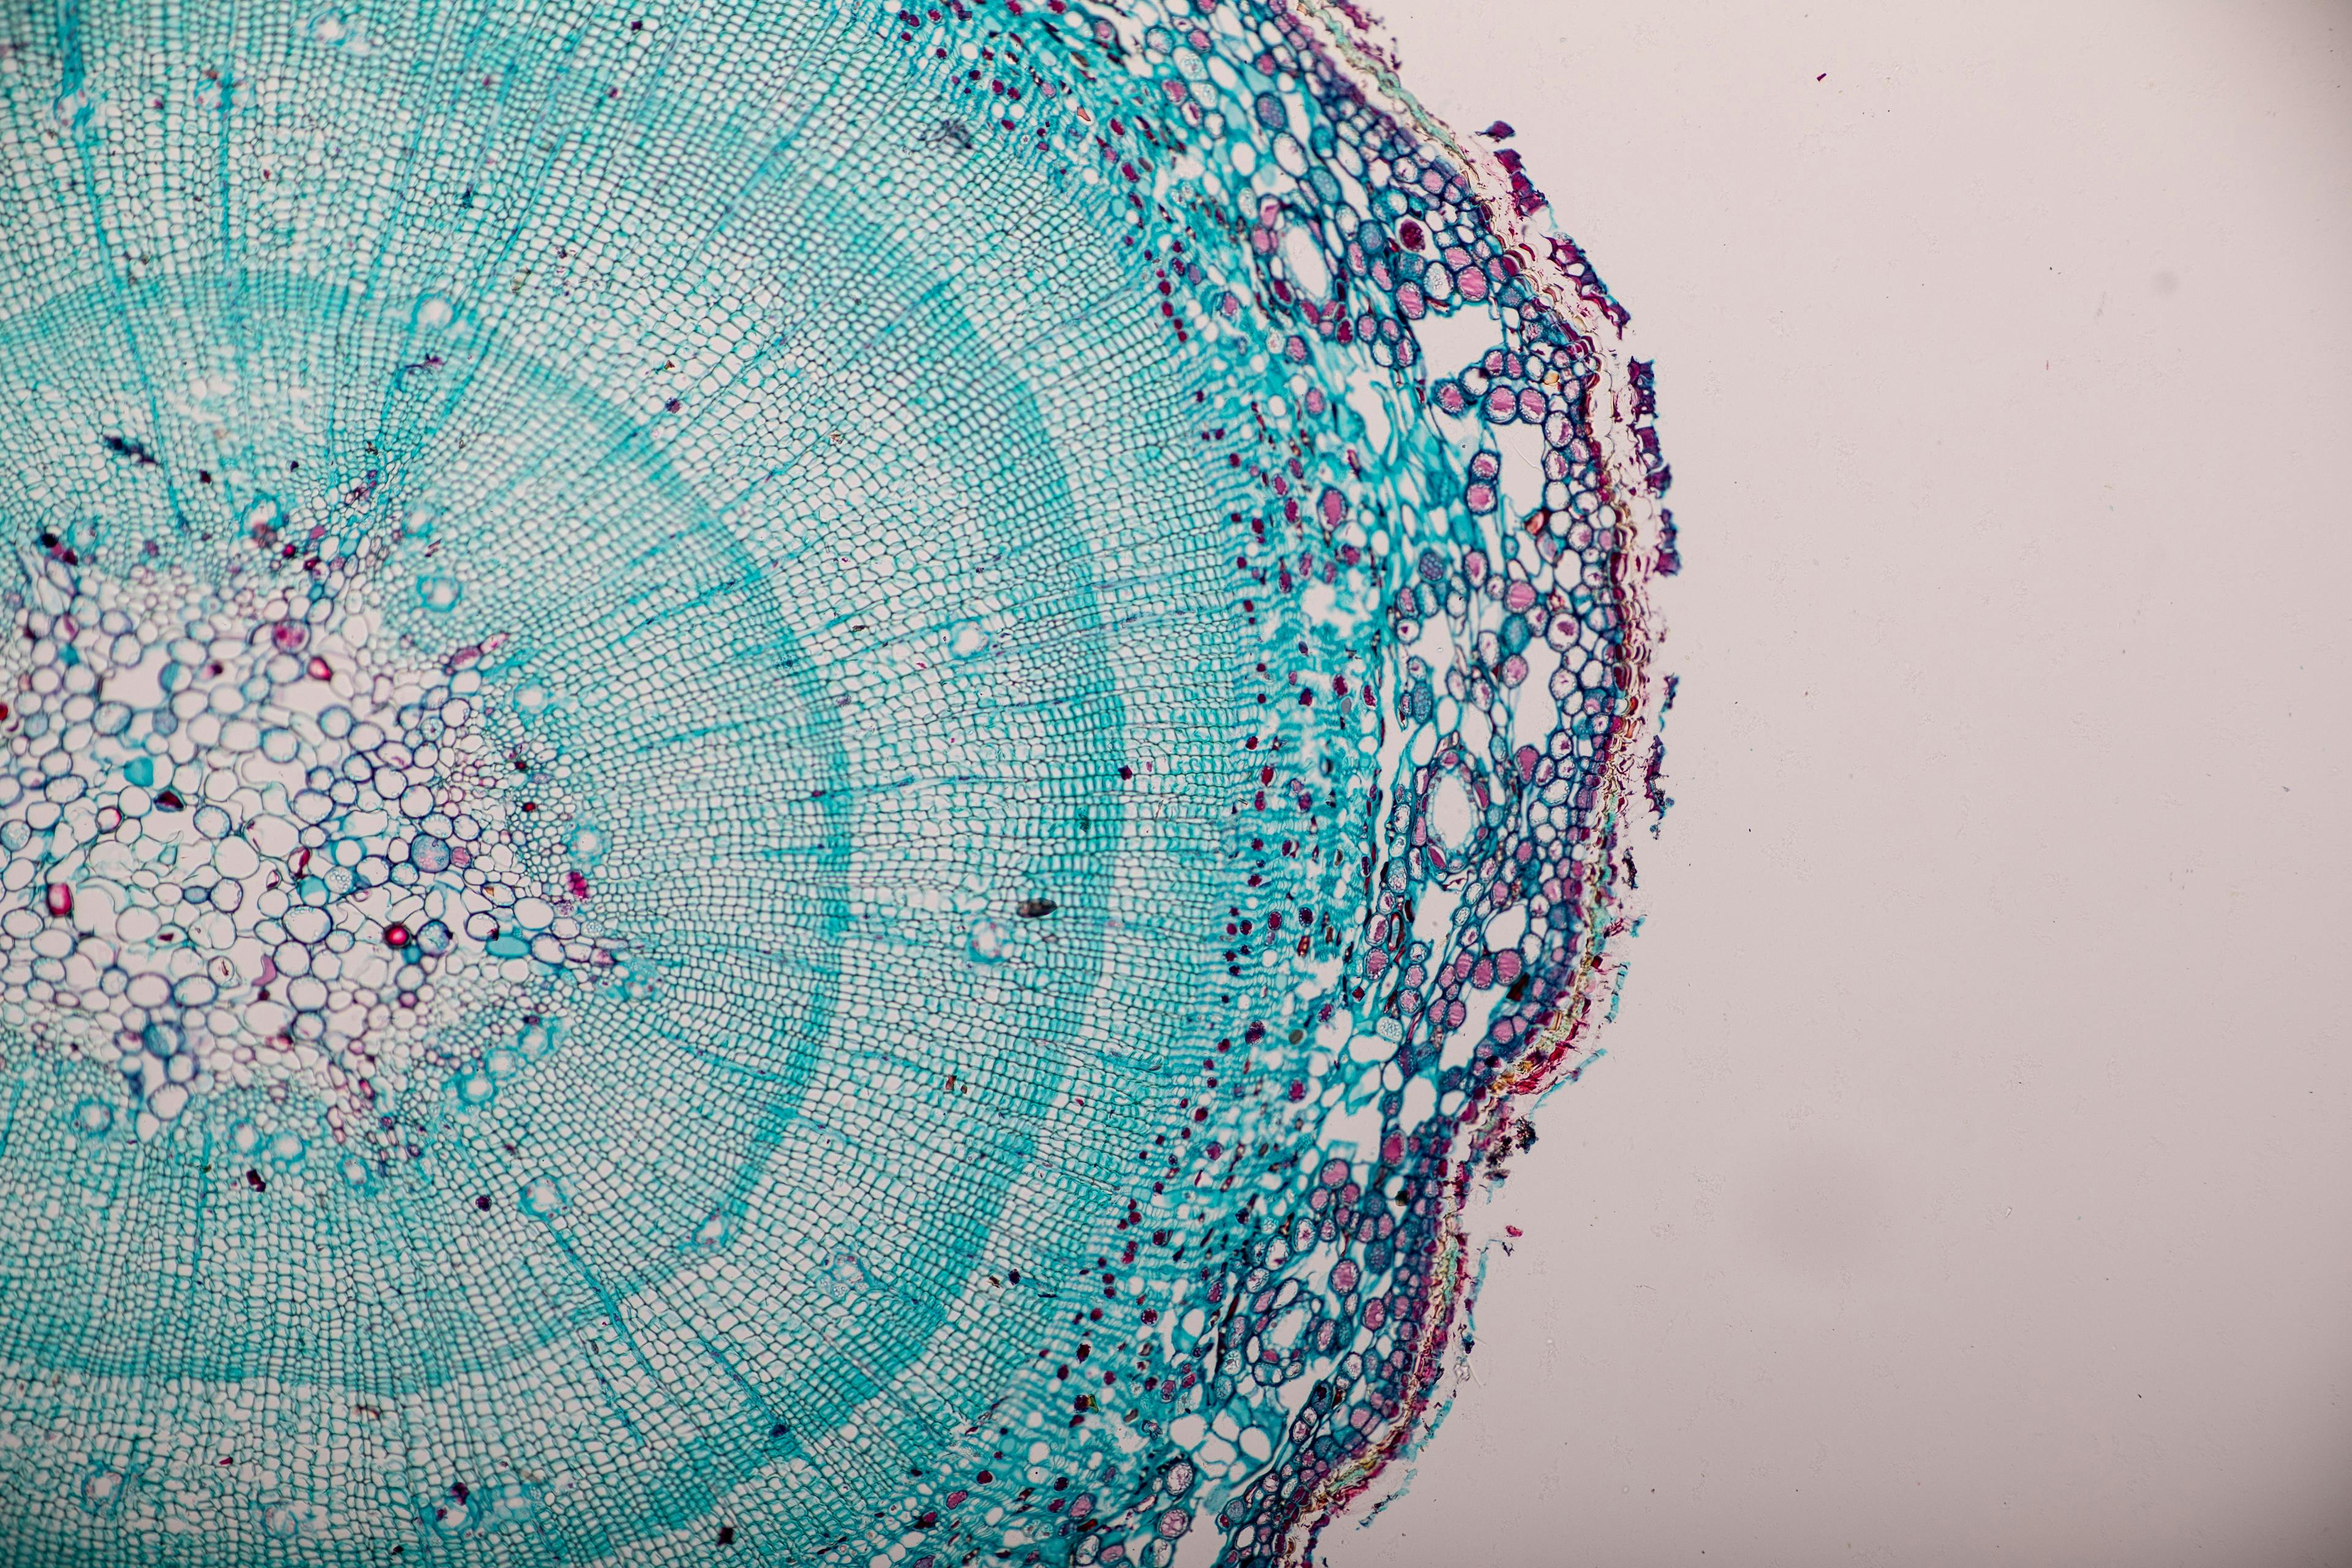 Cross-section Dicot, Monocot and Root of Plant Stem under the microscope for classroom education. | Image Credit: sinhyu - stock.adobe.com